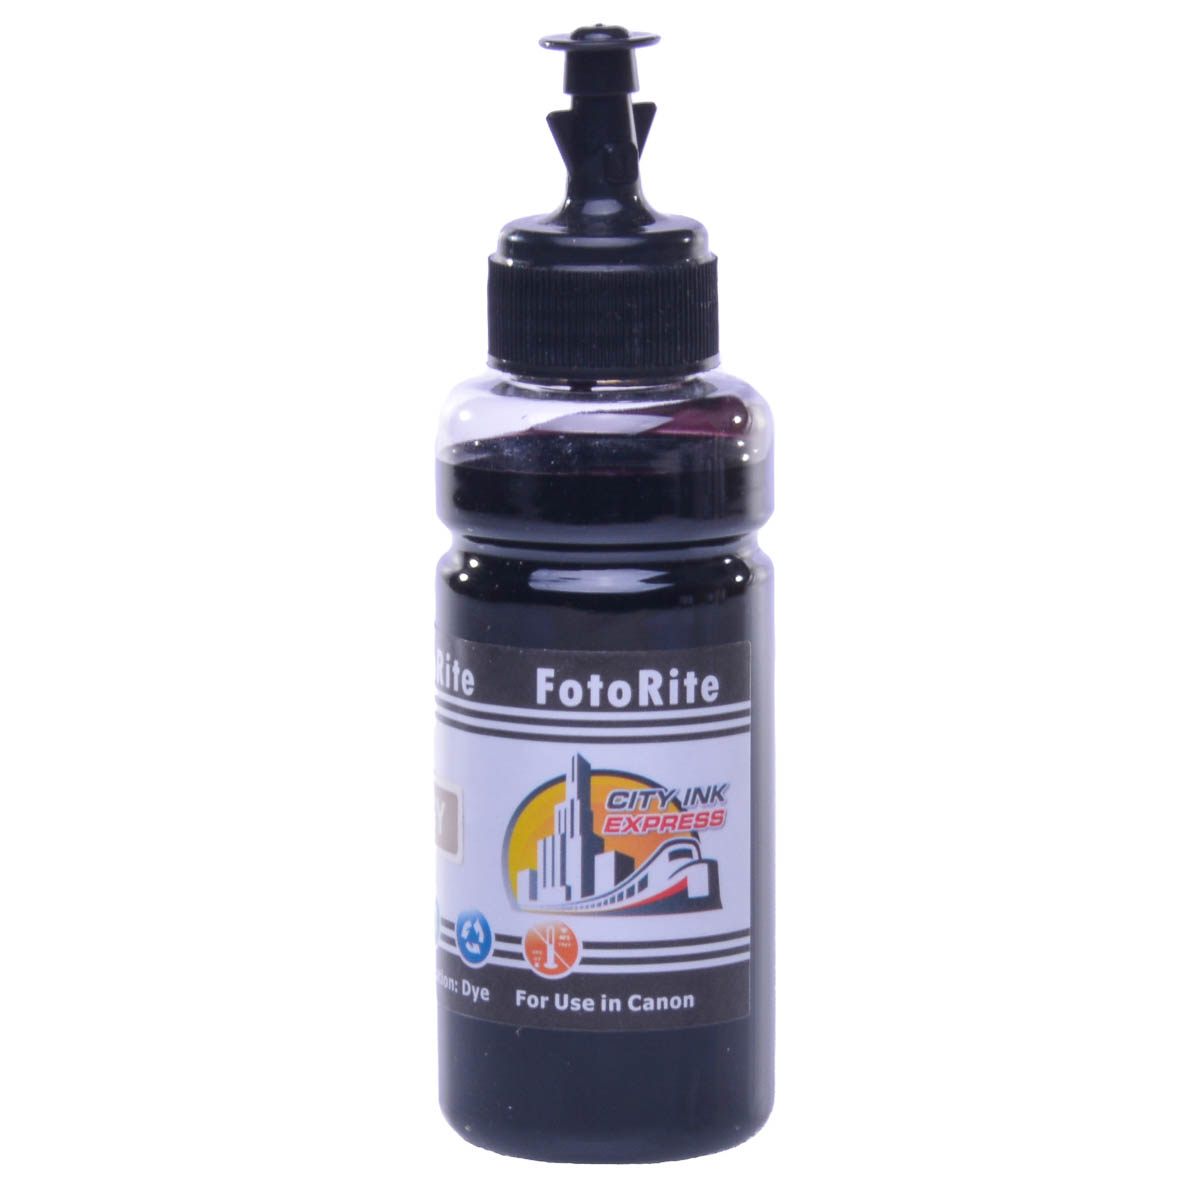 Cheap Grey dye ink replaces Canon Pixma MG6450 - CLI-551GY